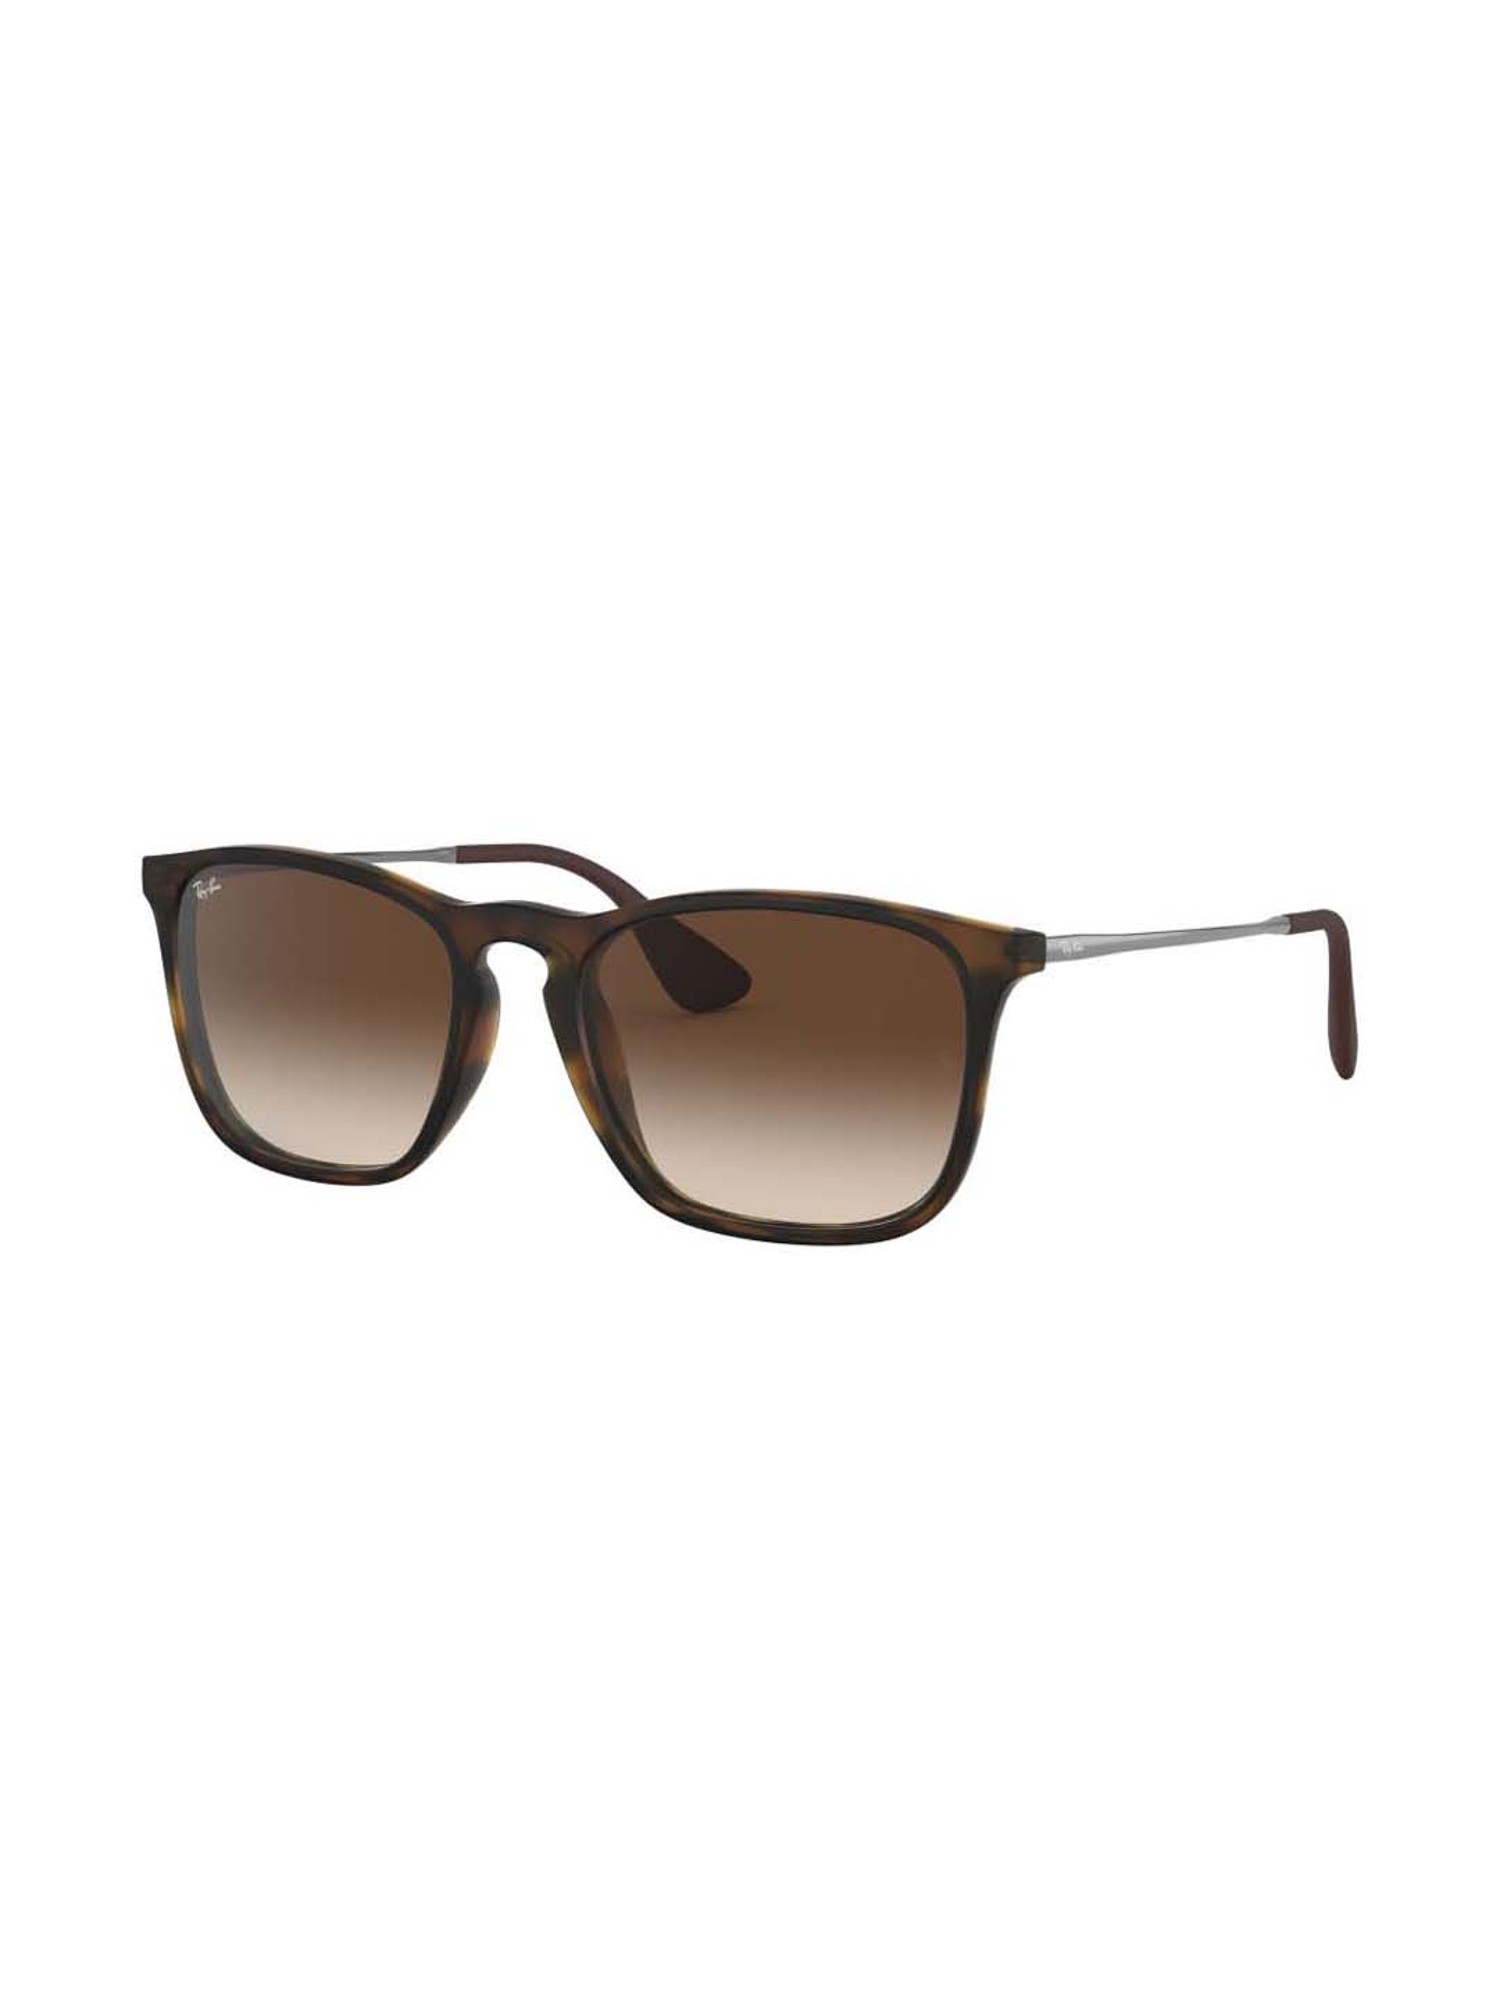 ray ban 4187 price in india